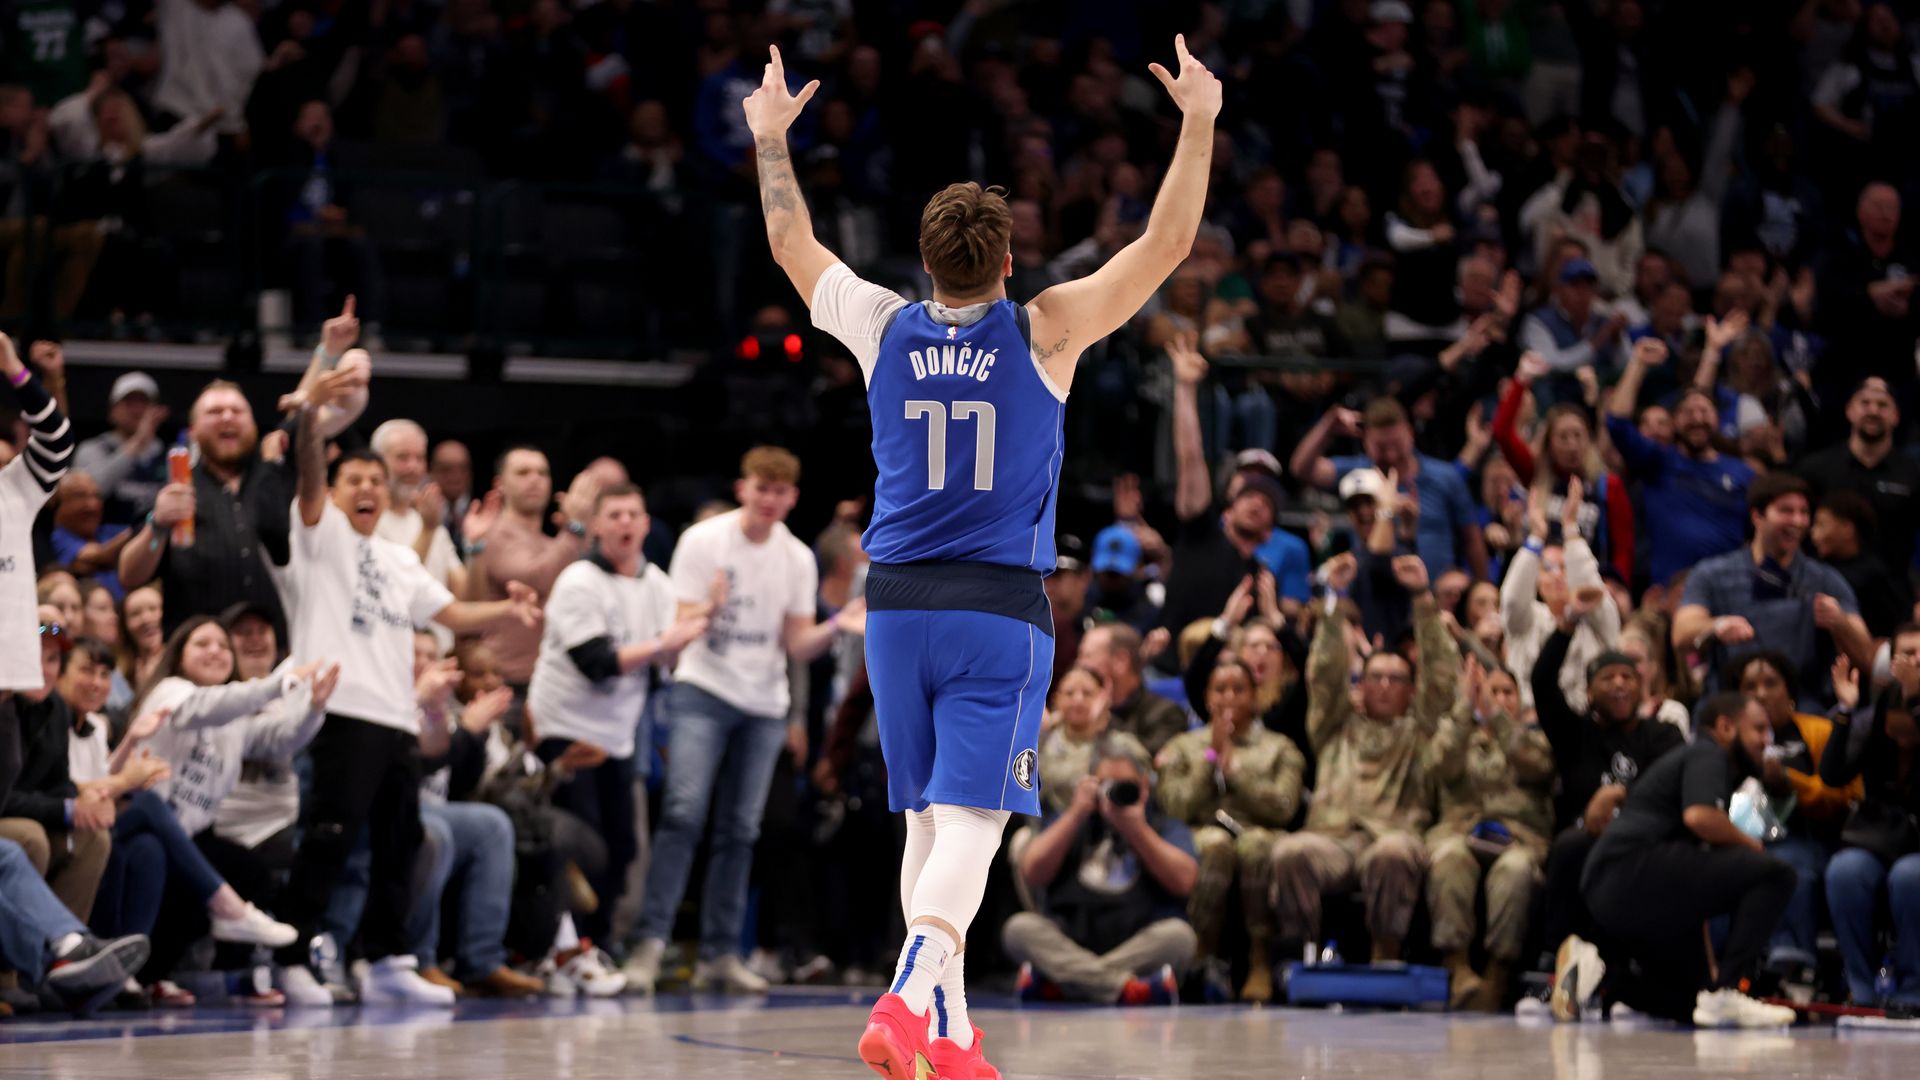 A basketball player in a blue uniform faces the crowd in an arena with his arms up